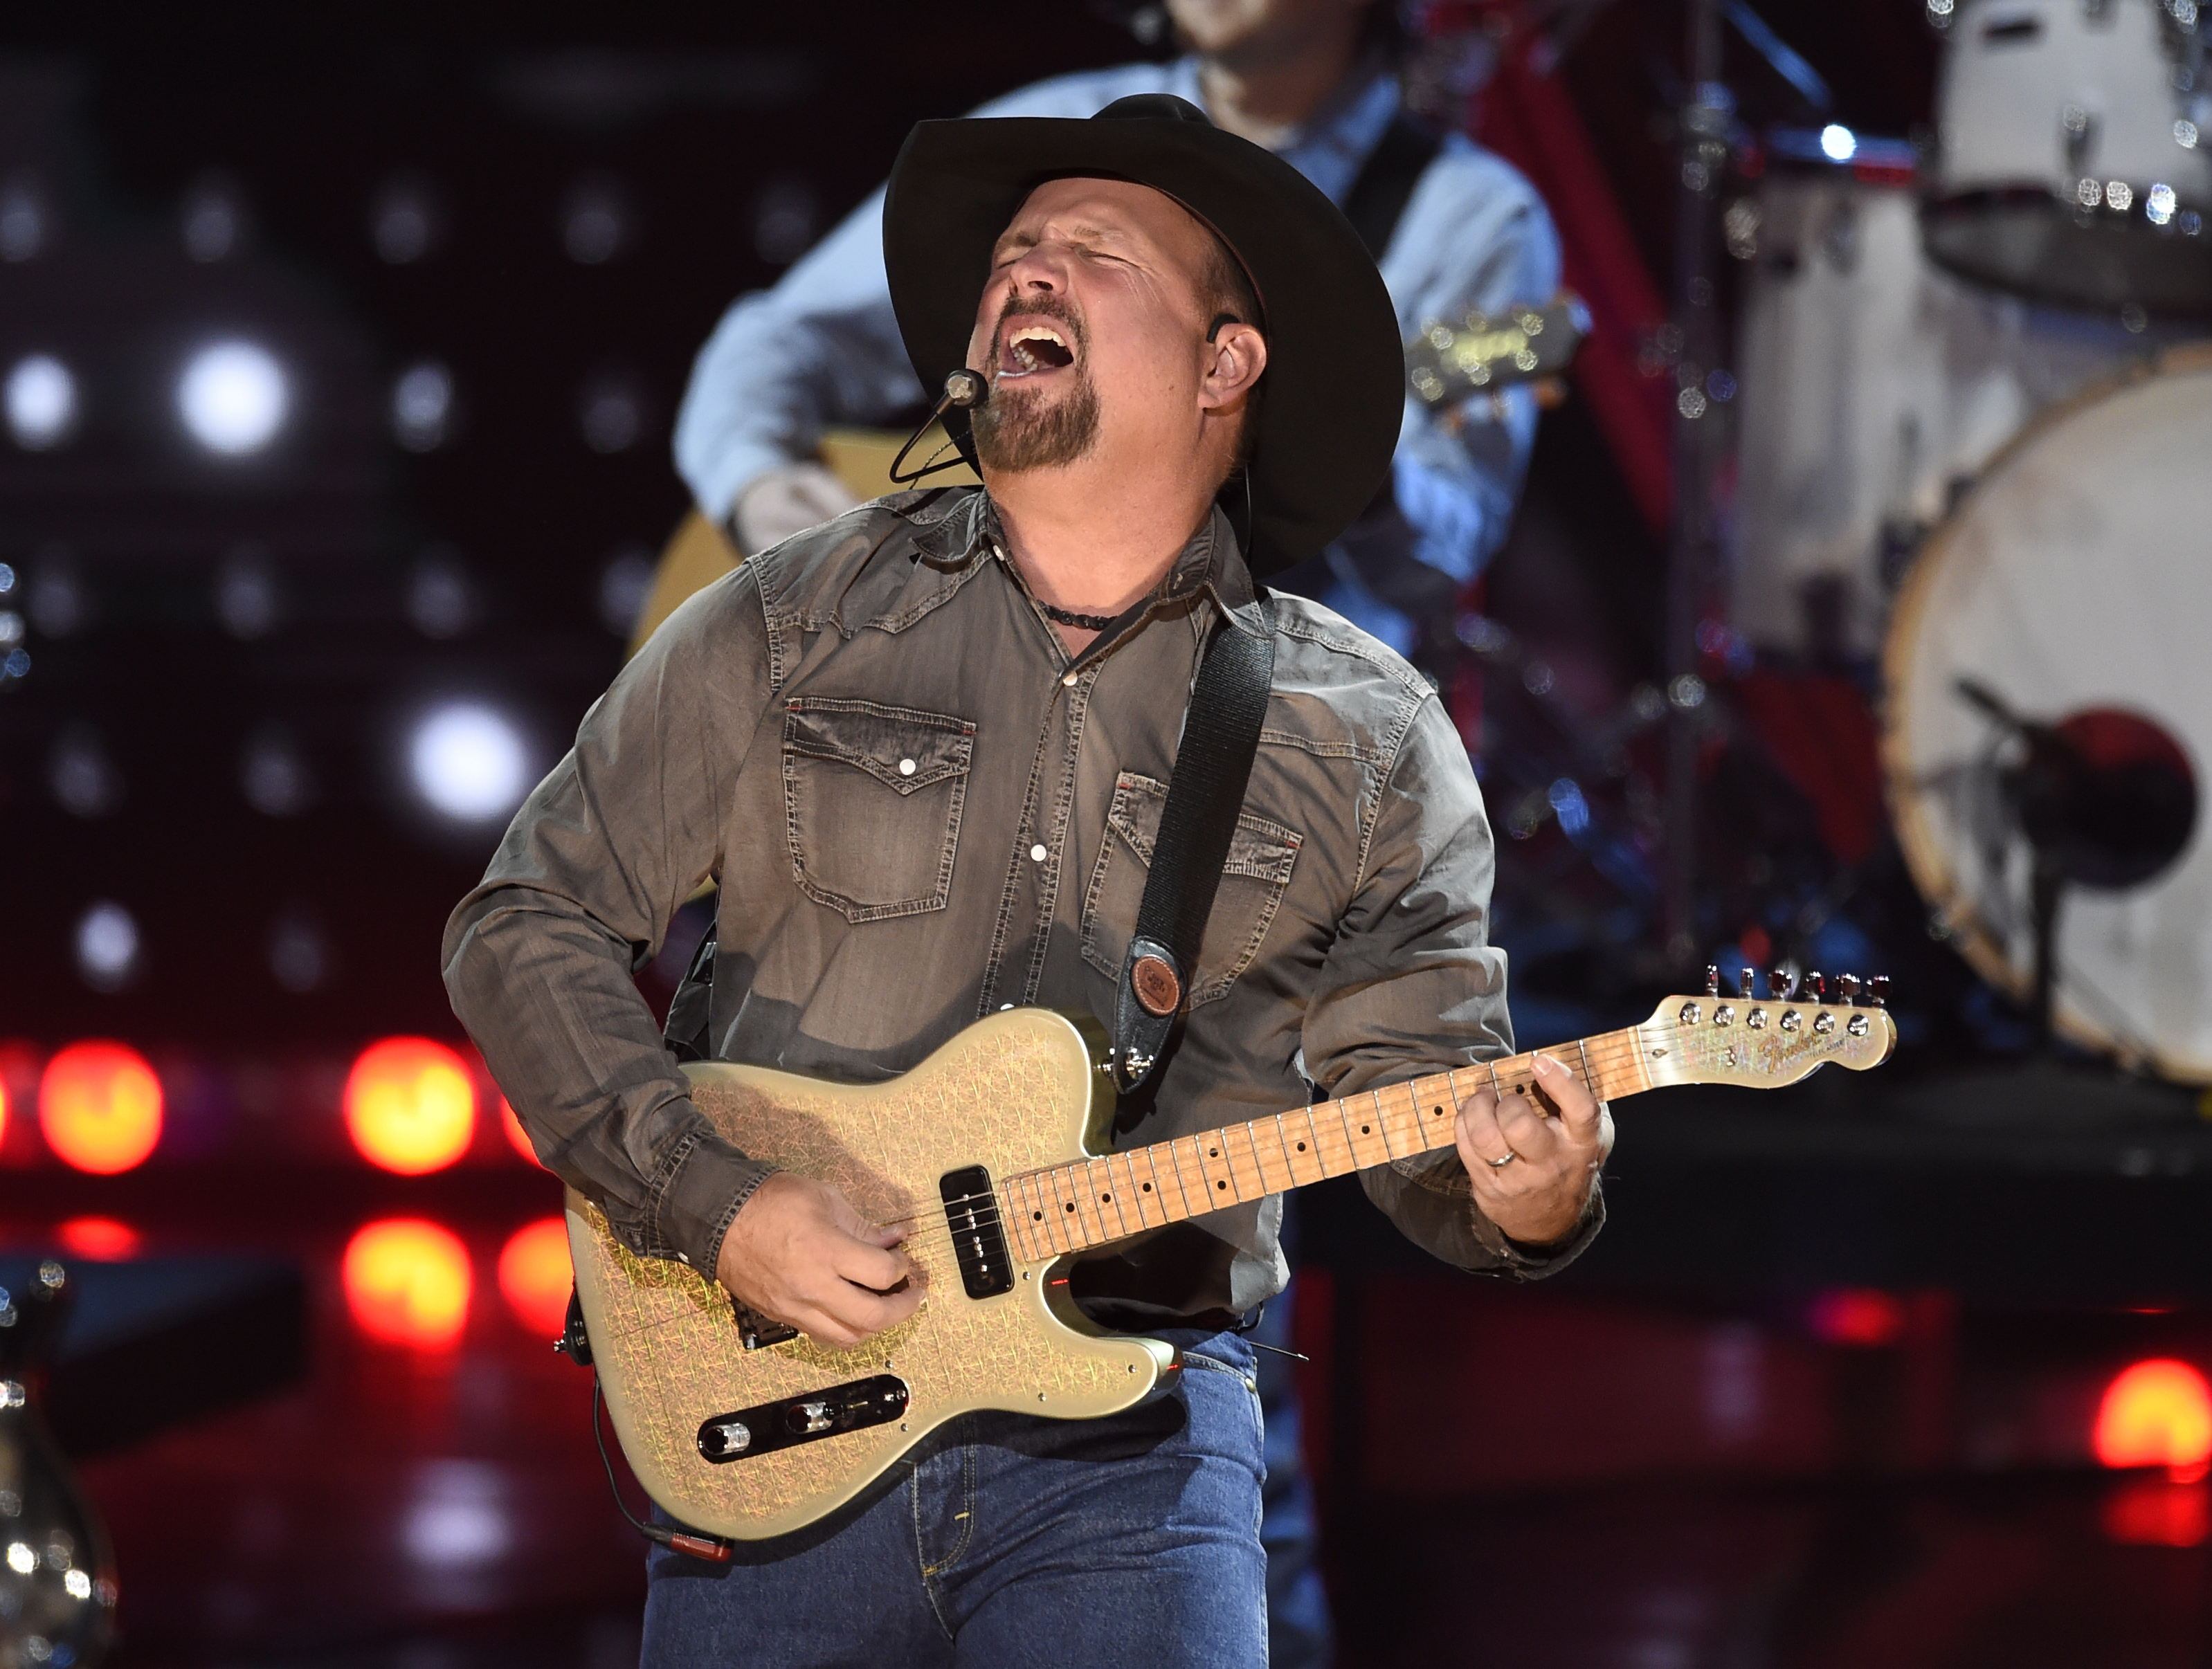 Garth Brooks Drive-In Theater show goes back on sale after huge demand